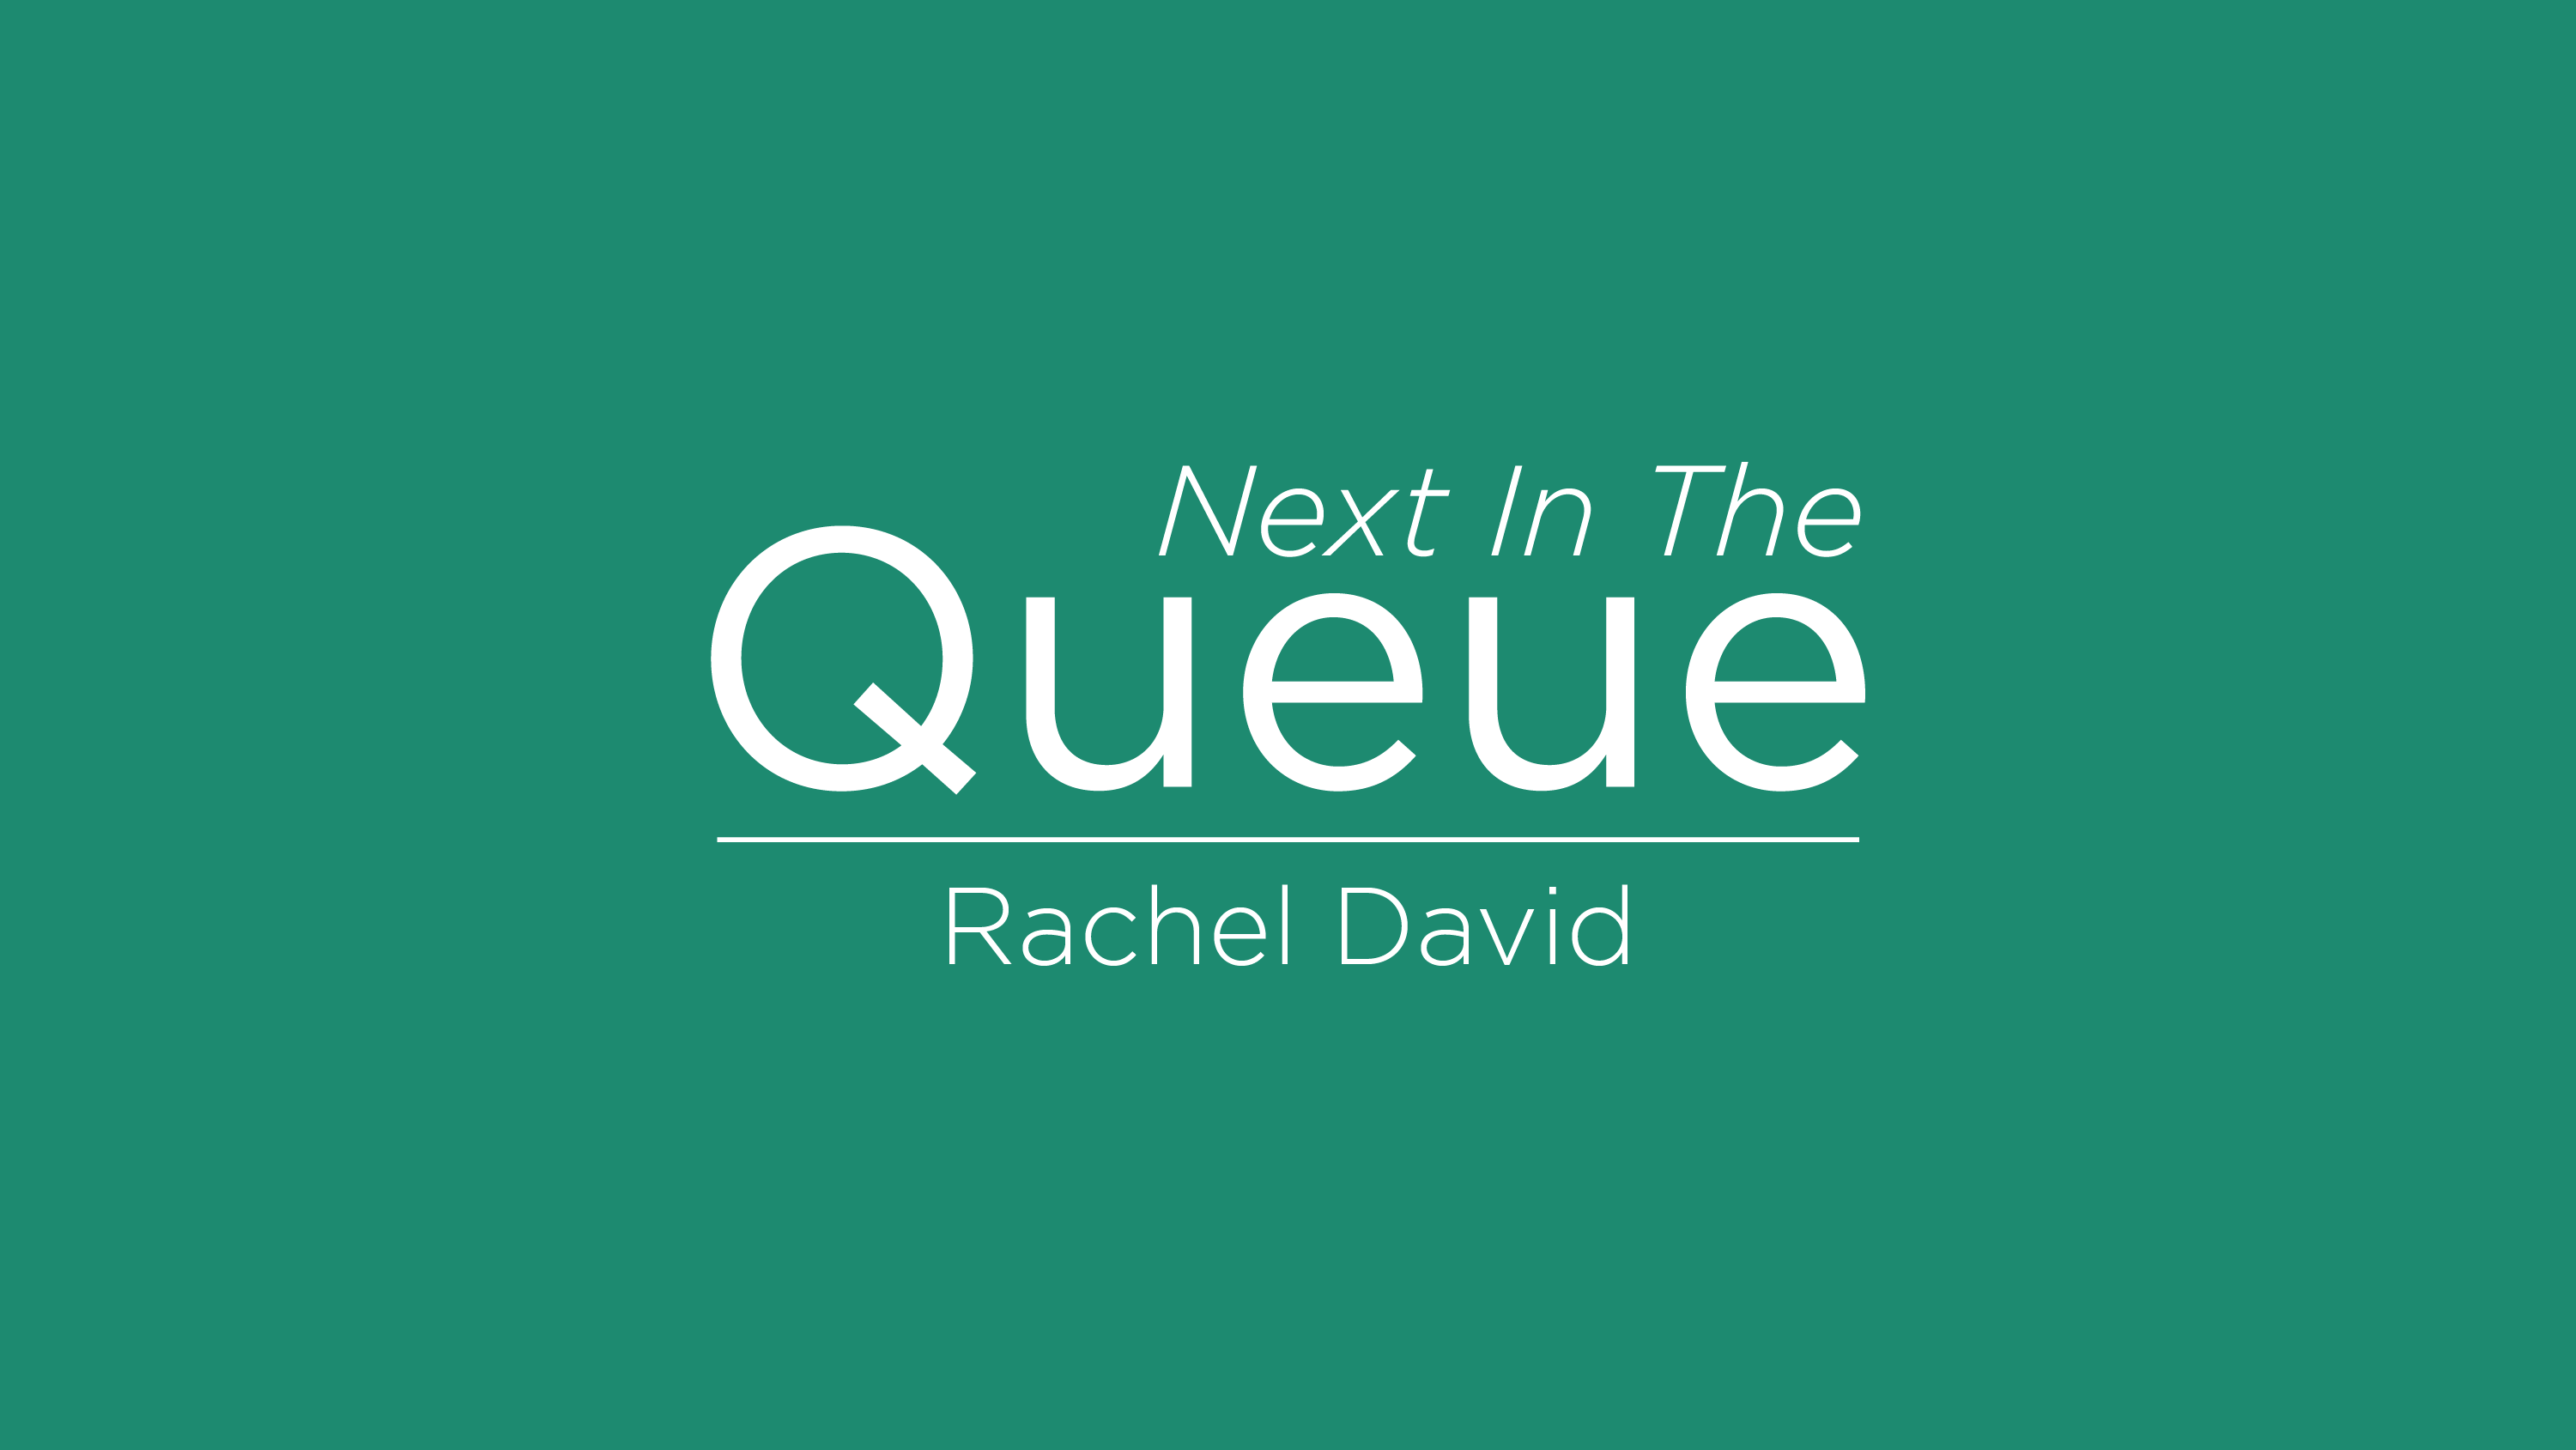 blog post cover graphic for The Queue featuring Rachel David